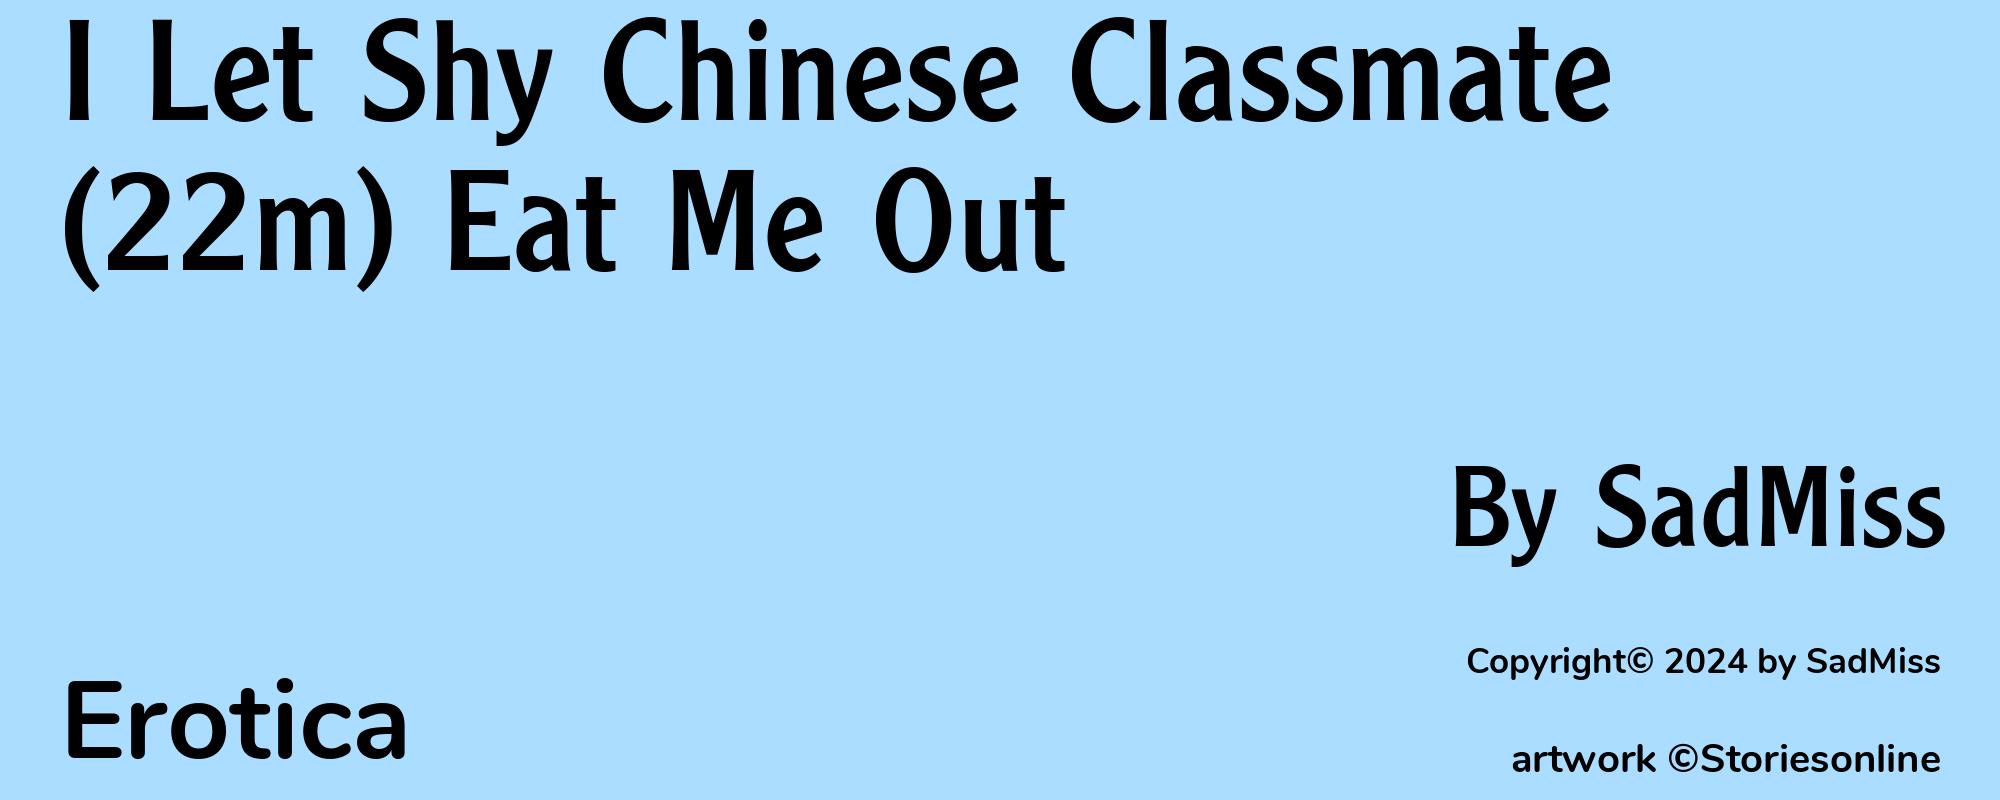 I Let Shy Chinese Classmate (22m) Eat Me Out - Cover